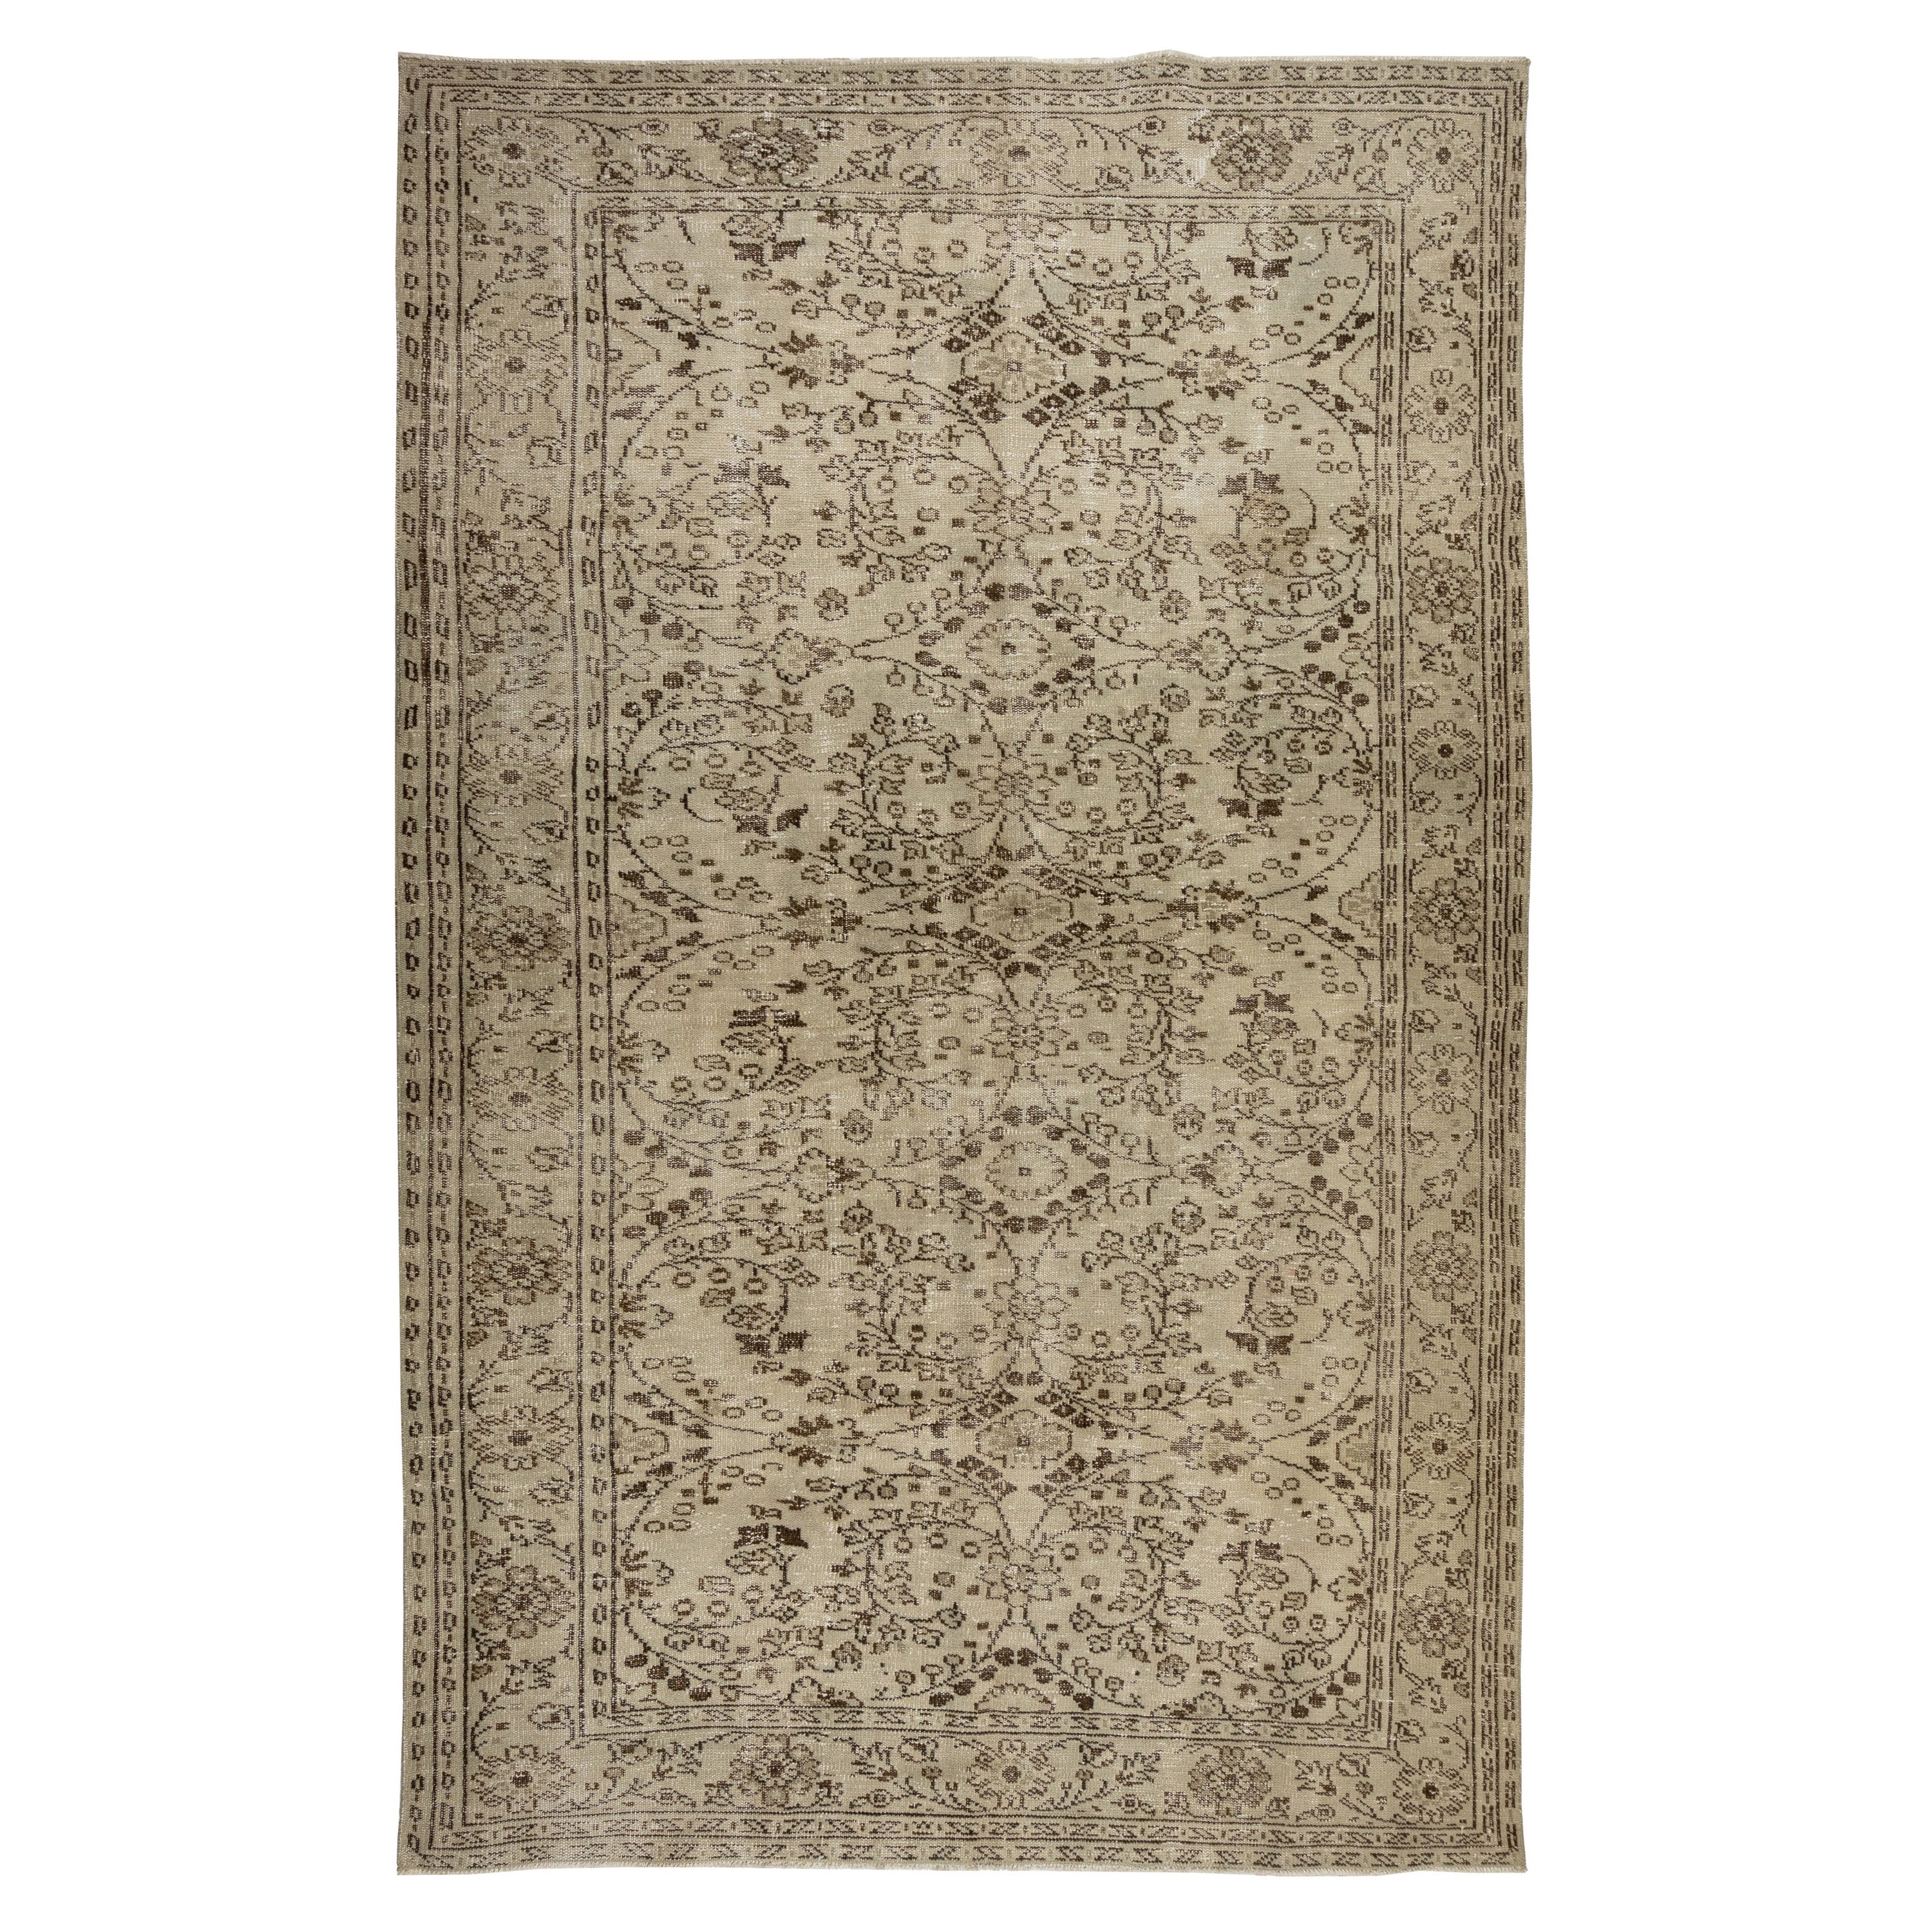 Hand-Knotted 1960's Oushak Area Rug with Floral Design in Beige Colors For Sale